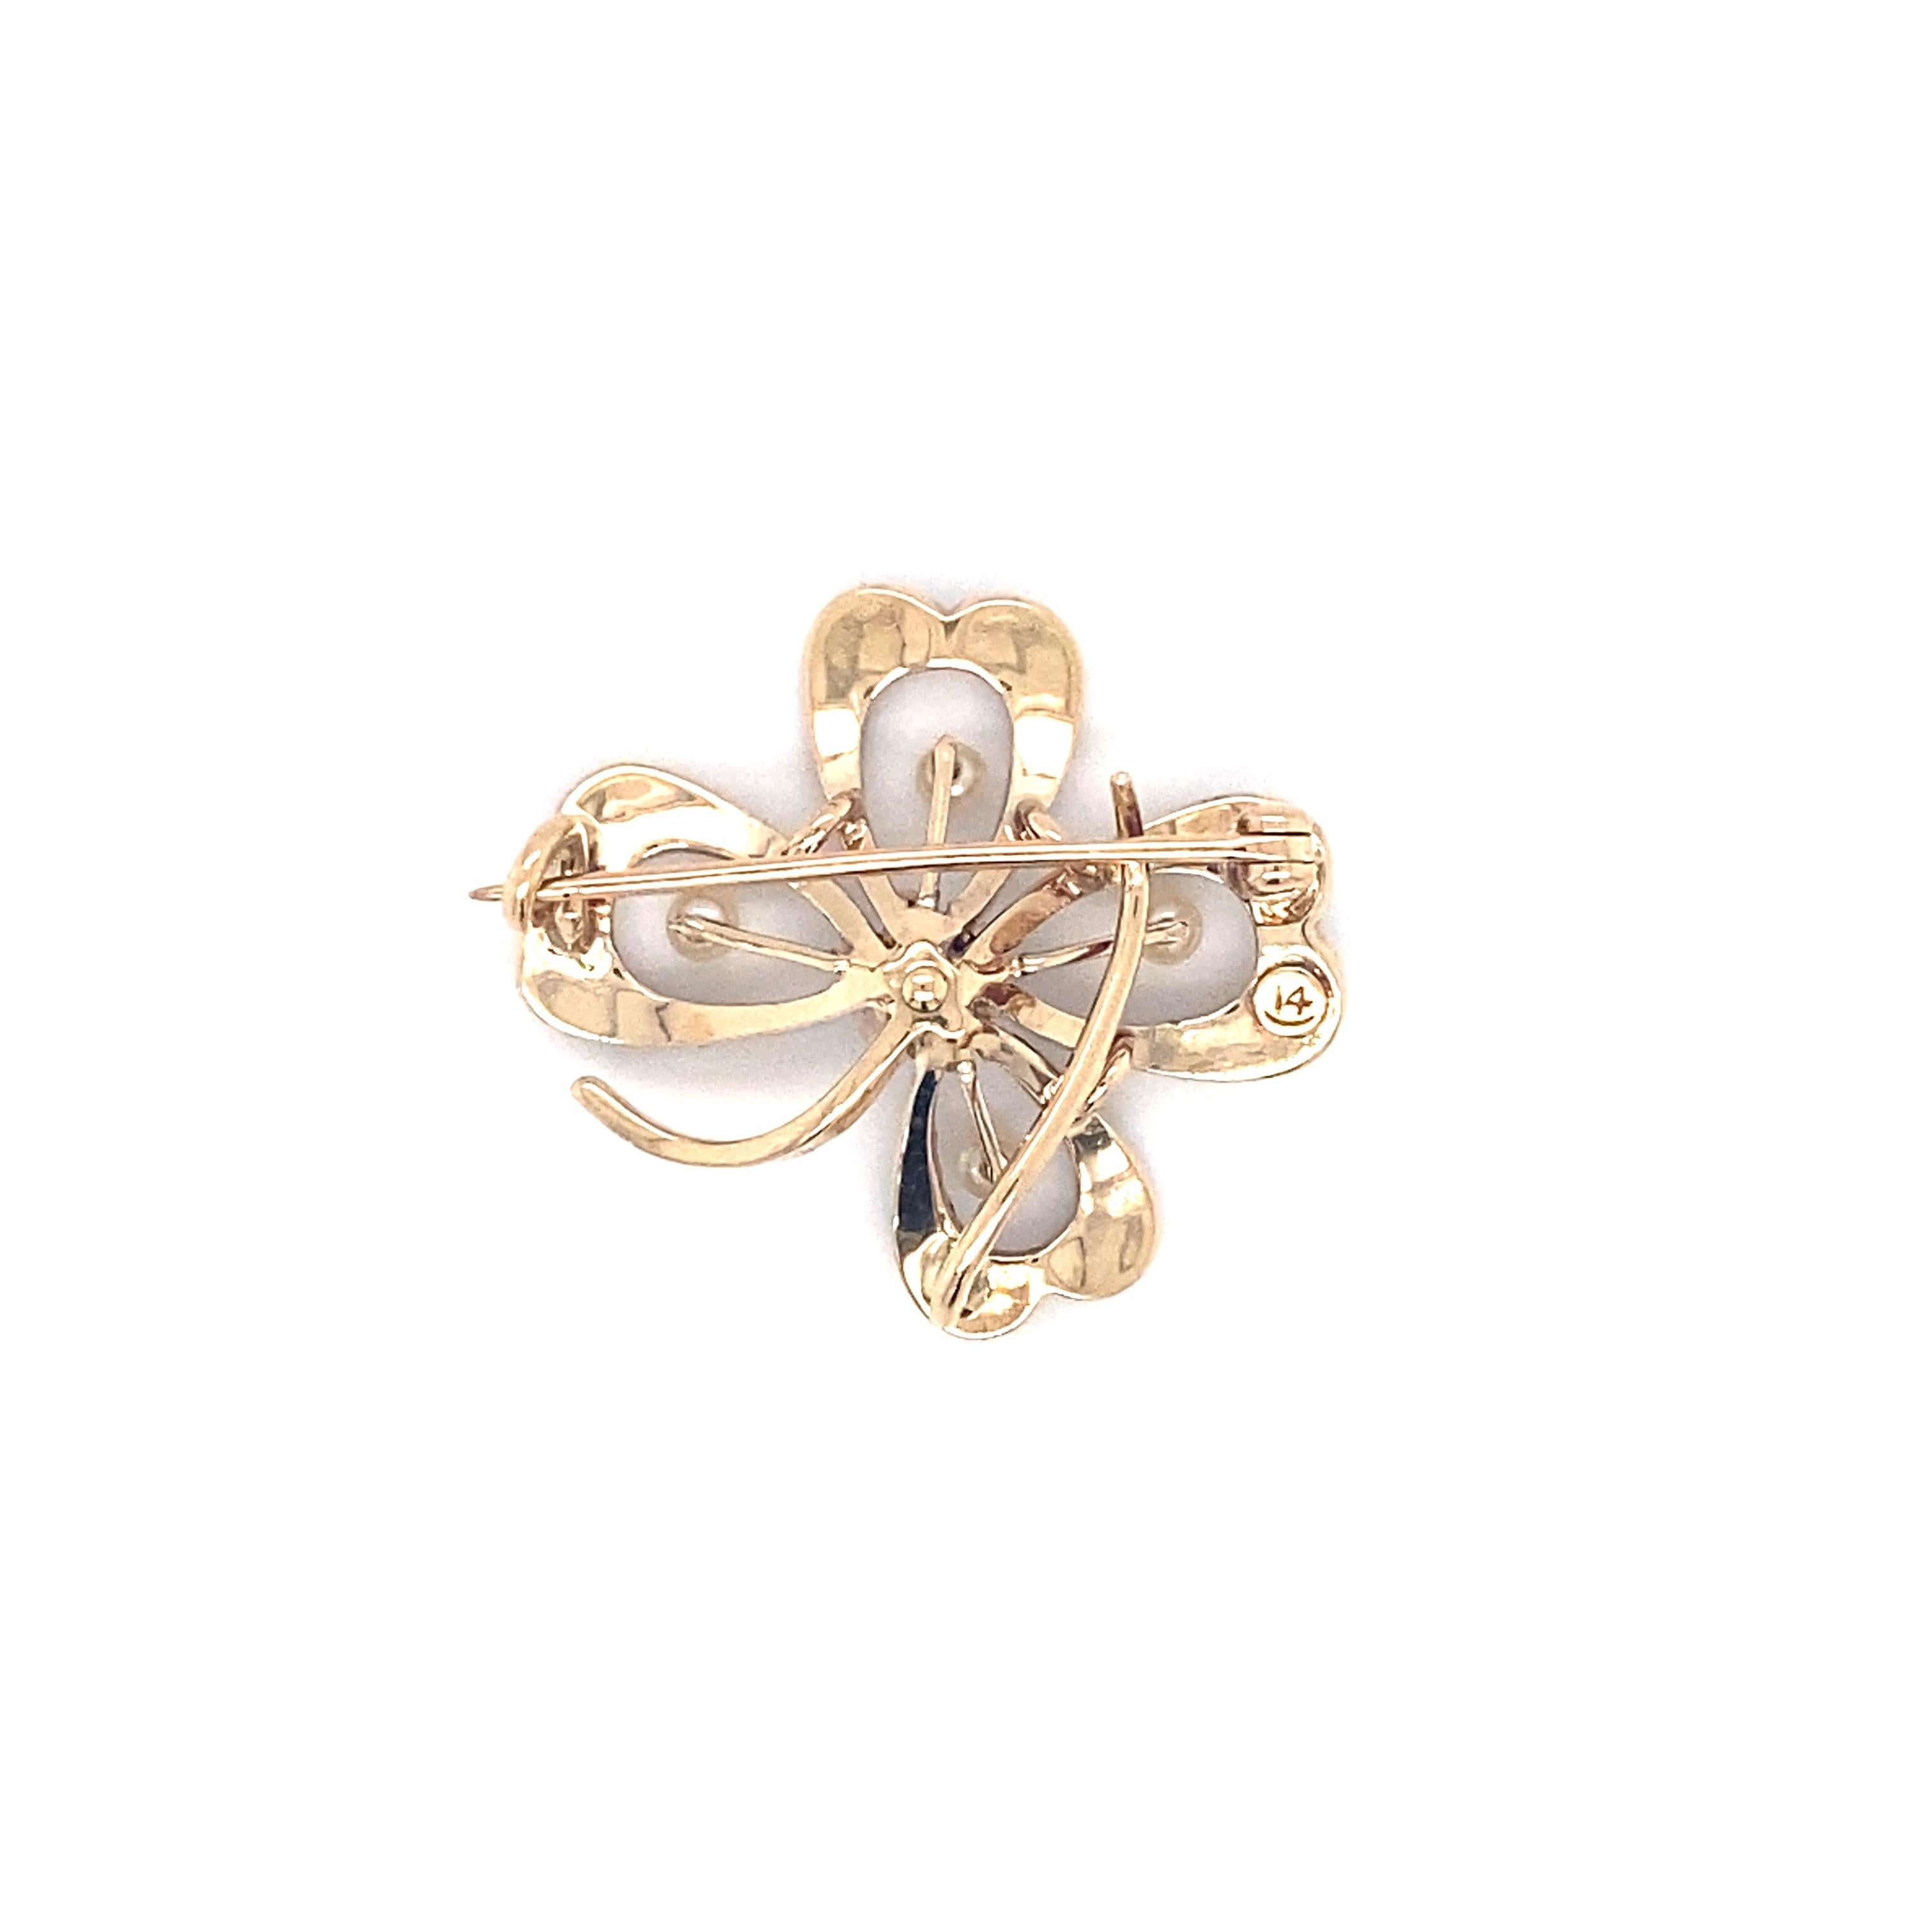 Item Details: This antique four leaf clover brooch has a center Asscher cut baby blue Ceylon sapphire. Dating back to 1890s, it's very well crafted and beautifully unique! 

Circa: 1890s
Metal Type: 14 Karat Yellow Gold
Weight: 4.3 grams
Size: 1